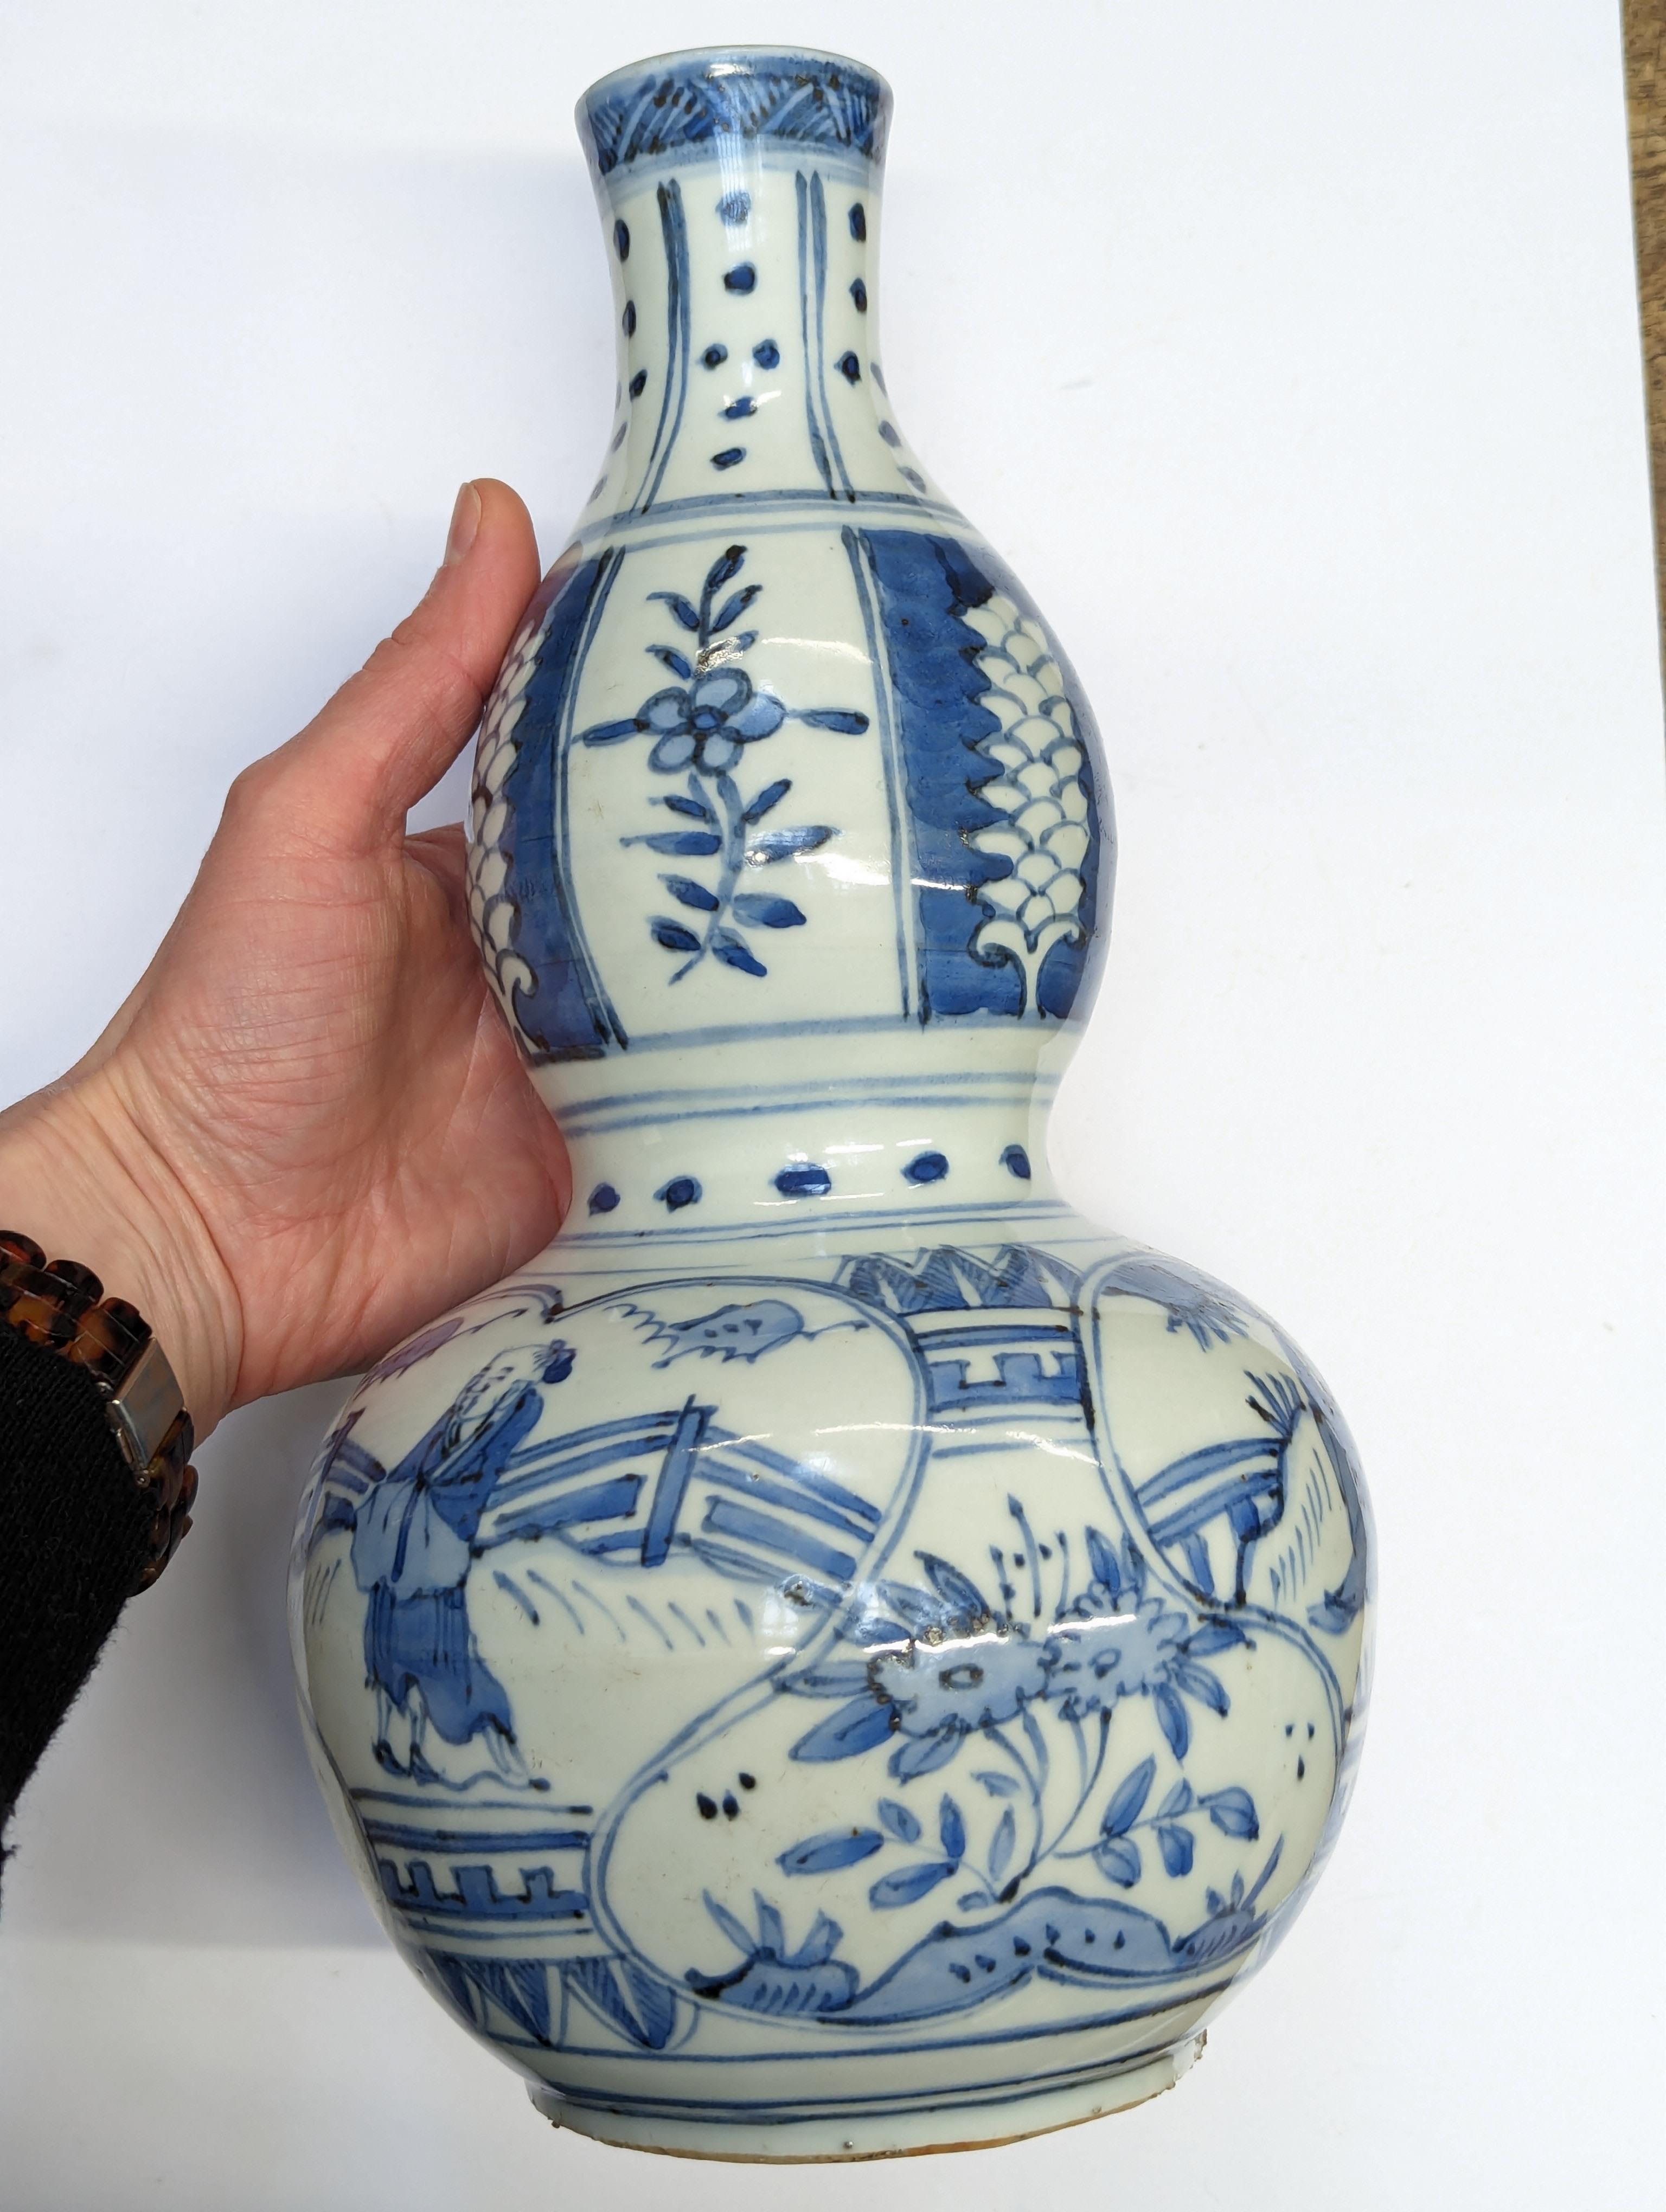 A CHINESE MING-STYLE BLUE AND WHITE DOUBLE GOURD VASE 二十世紀 明式青花葫蘆瓶 - Image 5 of 10